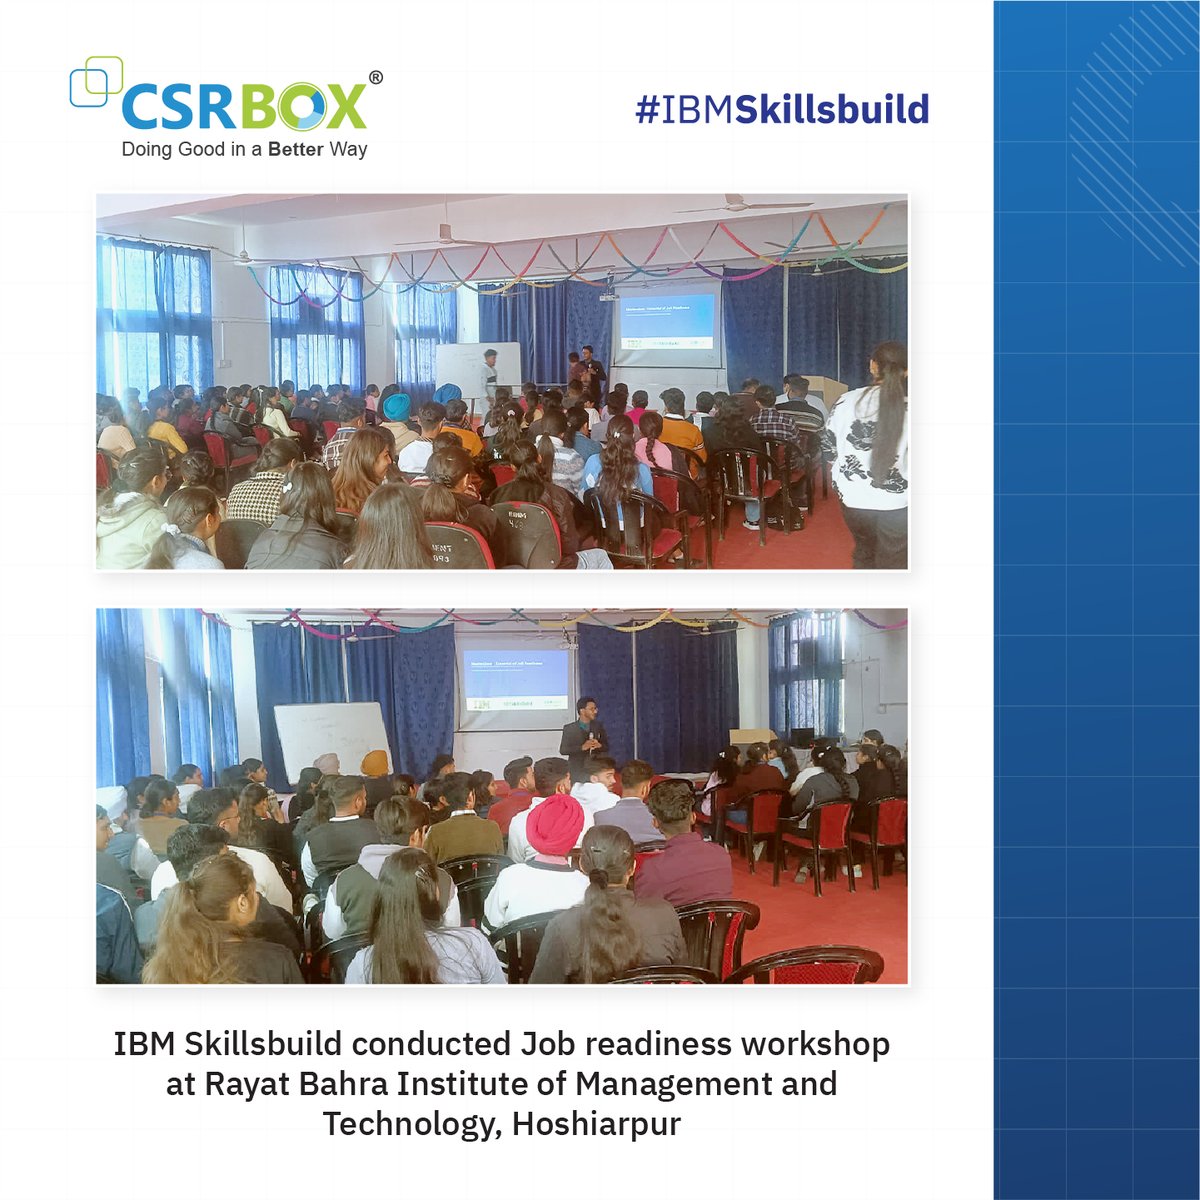 CSRBOX, in partnership with IBM SkillsBuild, recently hosted a dynamic one-day session on job readiness at Rayat Bahra Institute of Management and Technology. The event was a grand success, drawing in over 300 enthusiastic students across different disciplines. #IBMstories